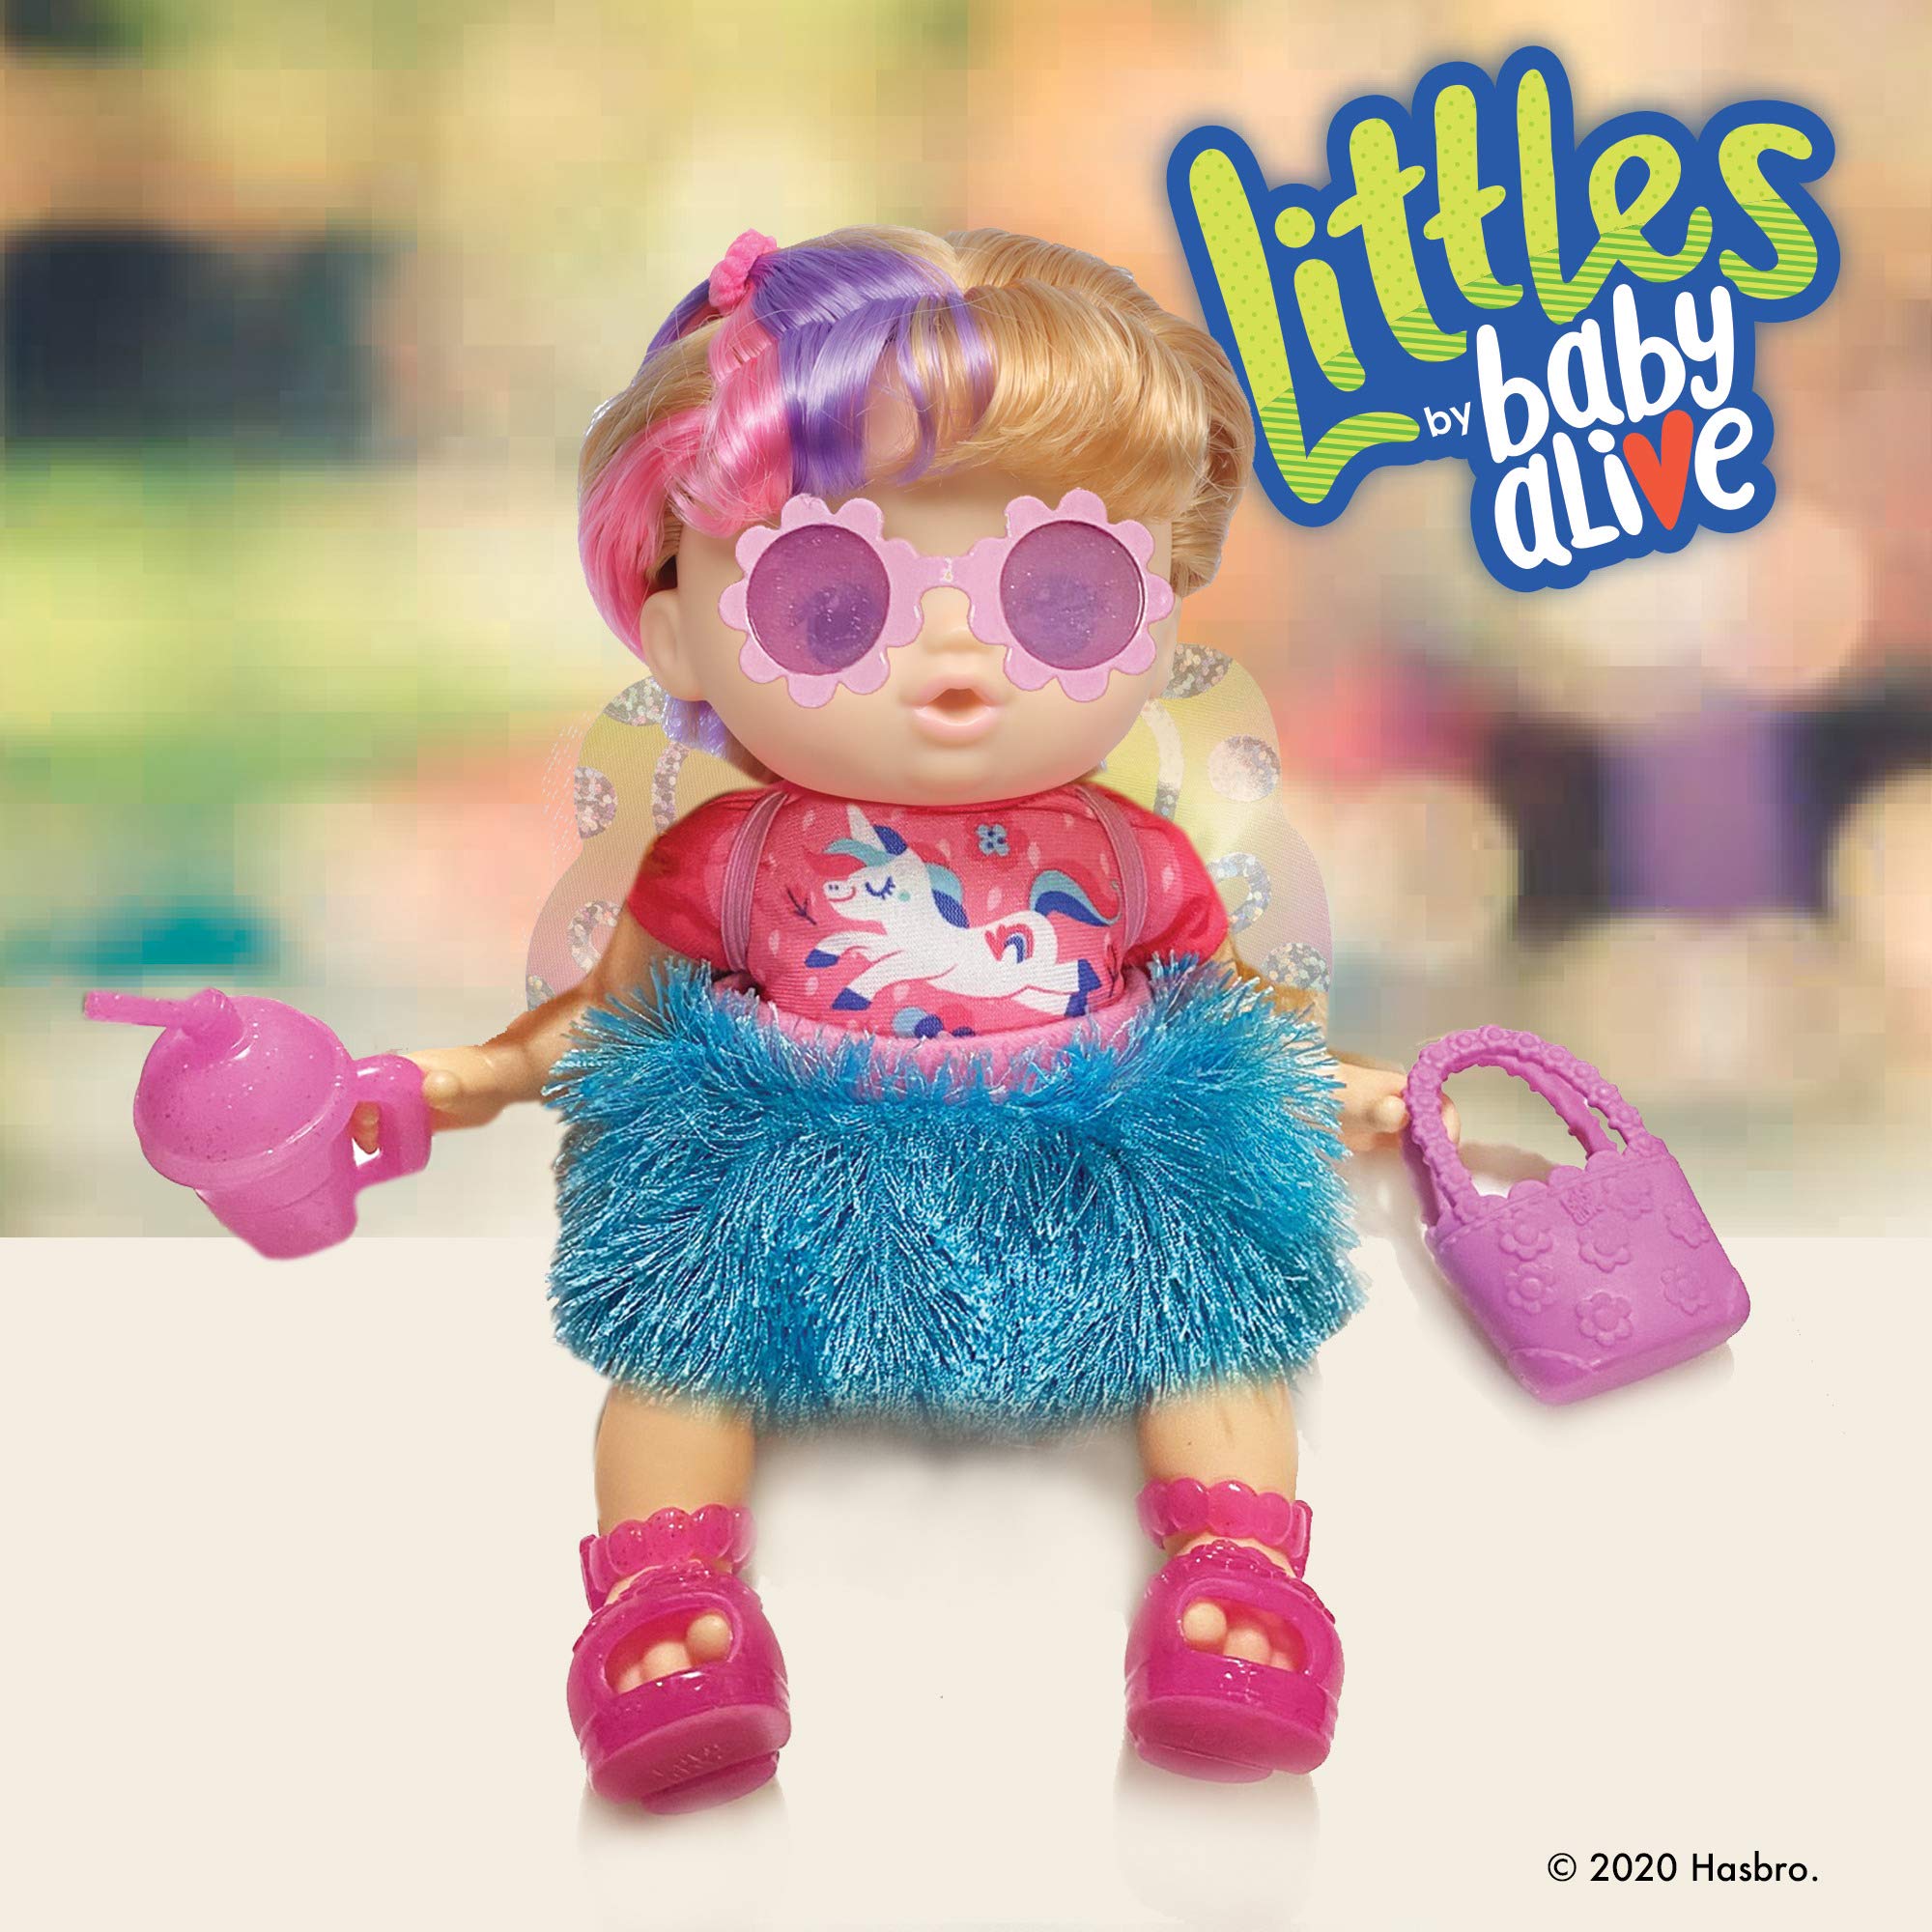 Baby Alive Littles, Fantasy Styles Squad Doll, Little Kiera, Fairytale Accessories, Wavy Blonde Hair Toy for Kids Ages 3 Years and Up (Amazon Exclusive)